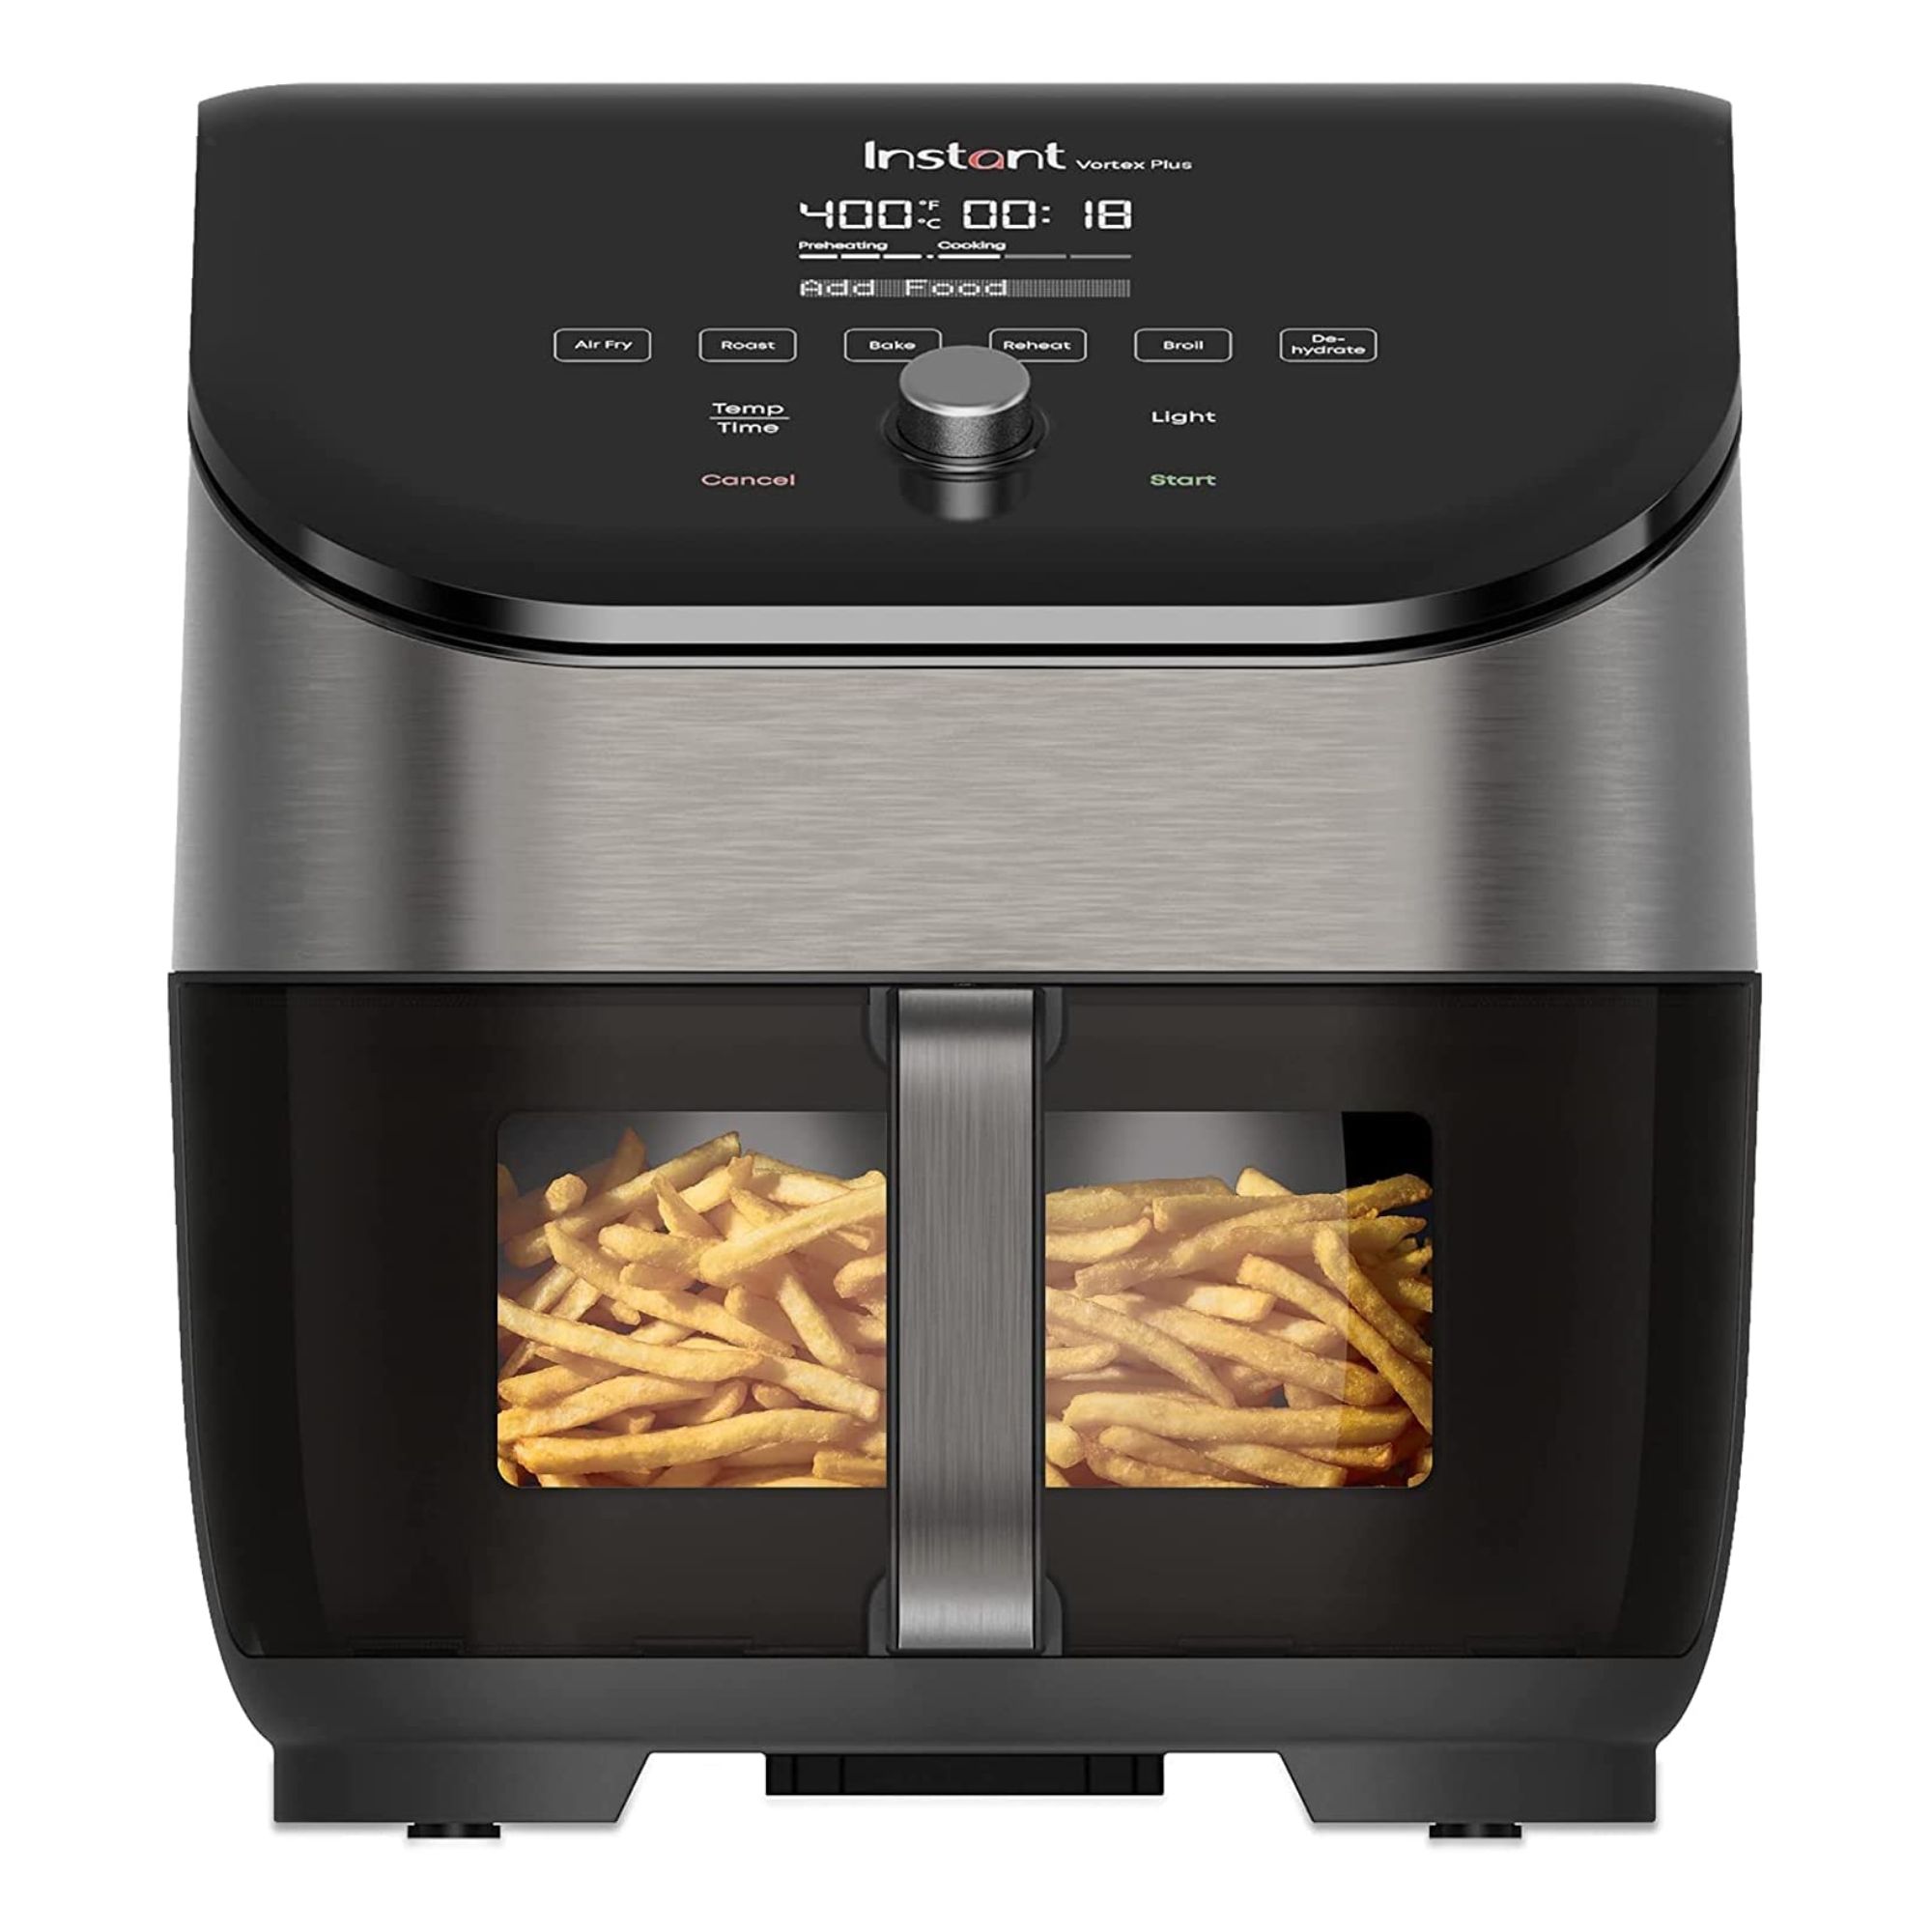 Instant Vortex with ClearCook air fryer